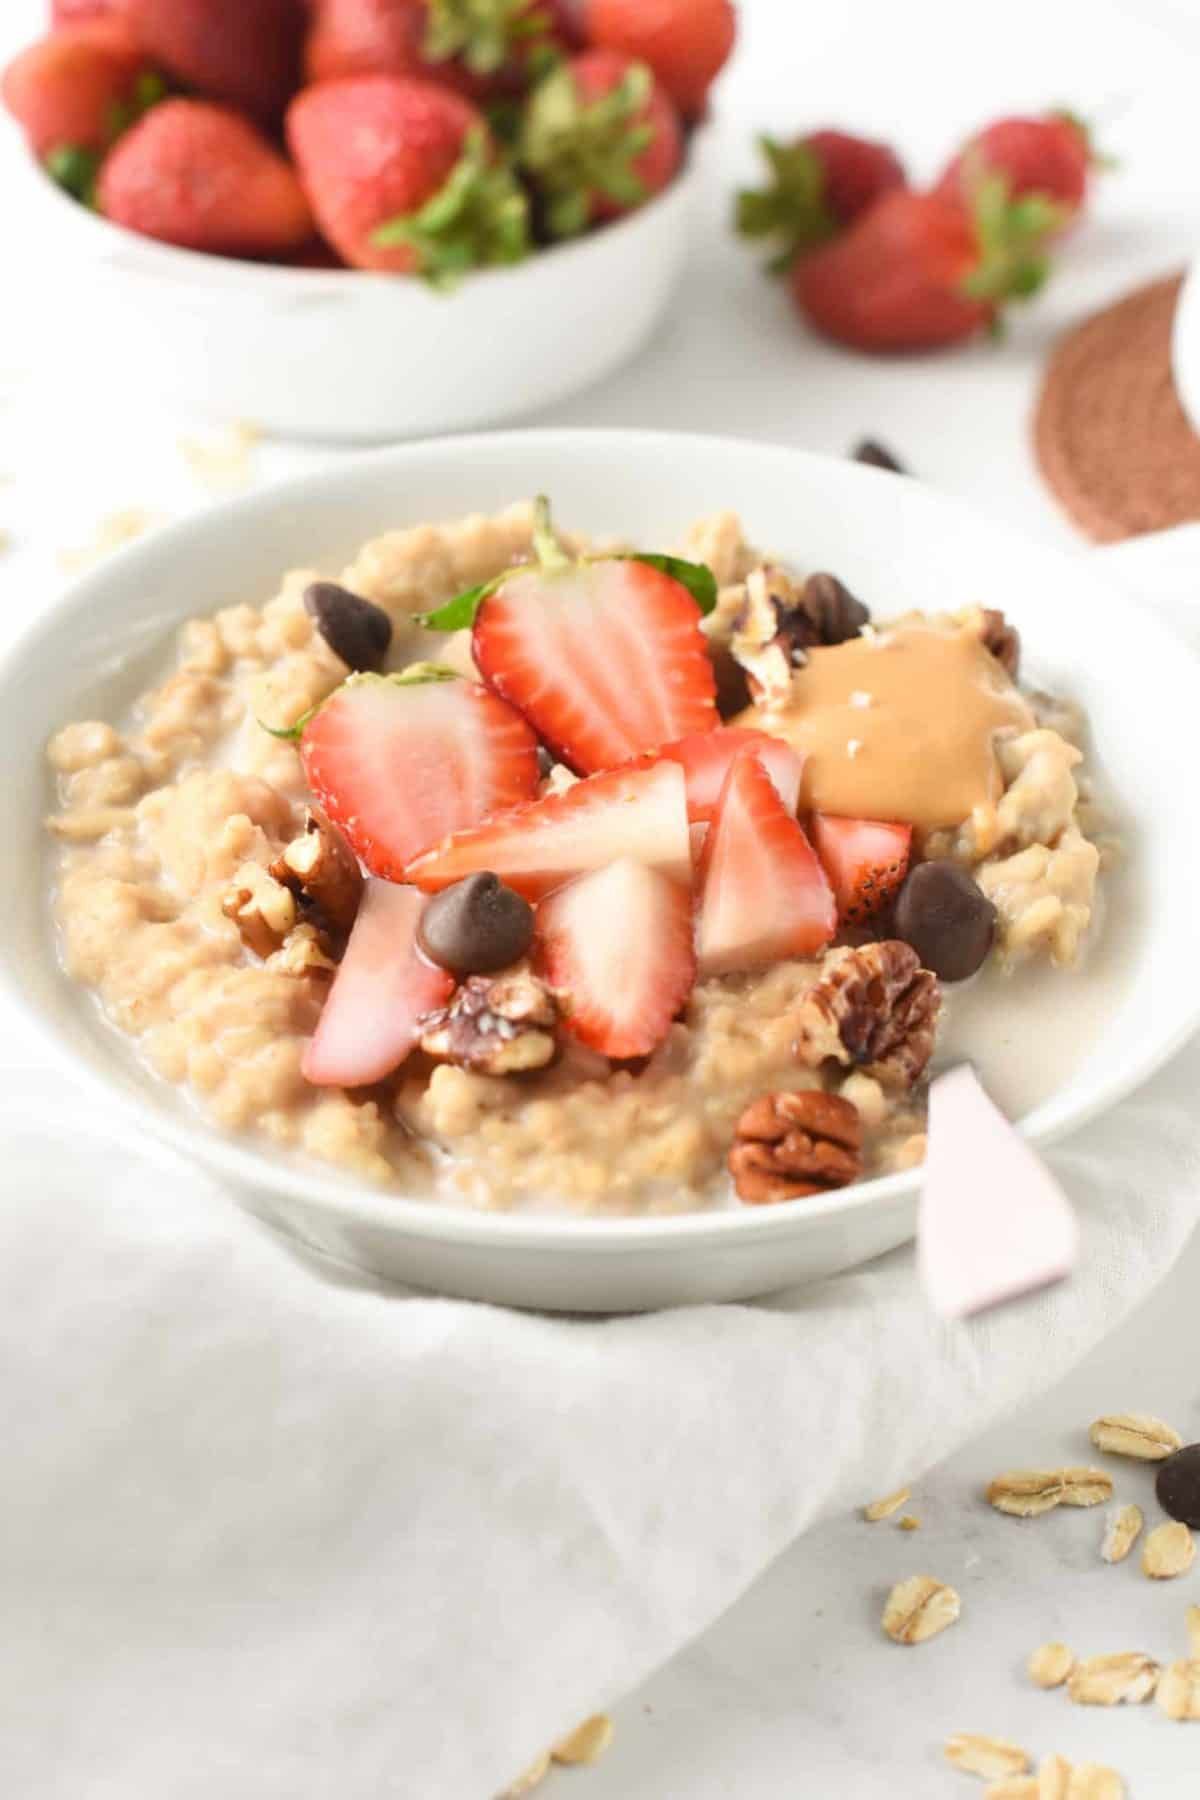 Protein Powder Oatmeal with fruits, nuts in a white bowl.